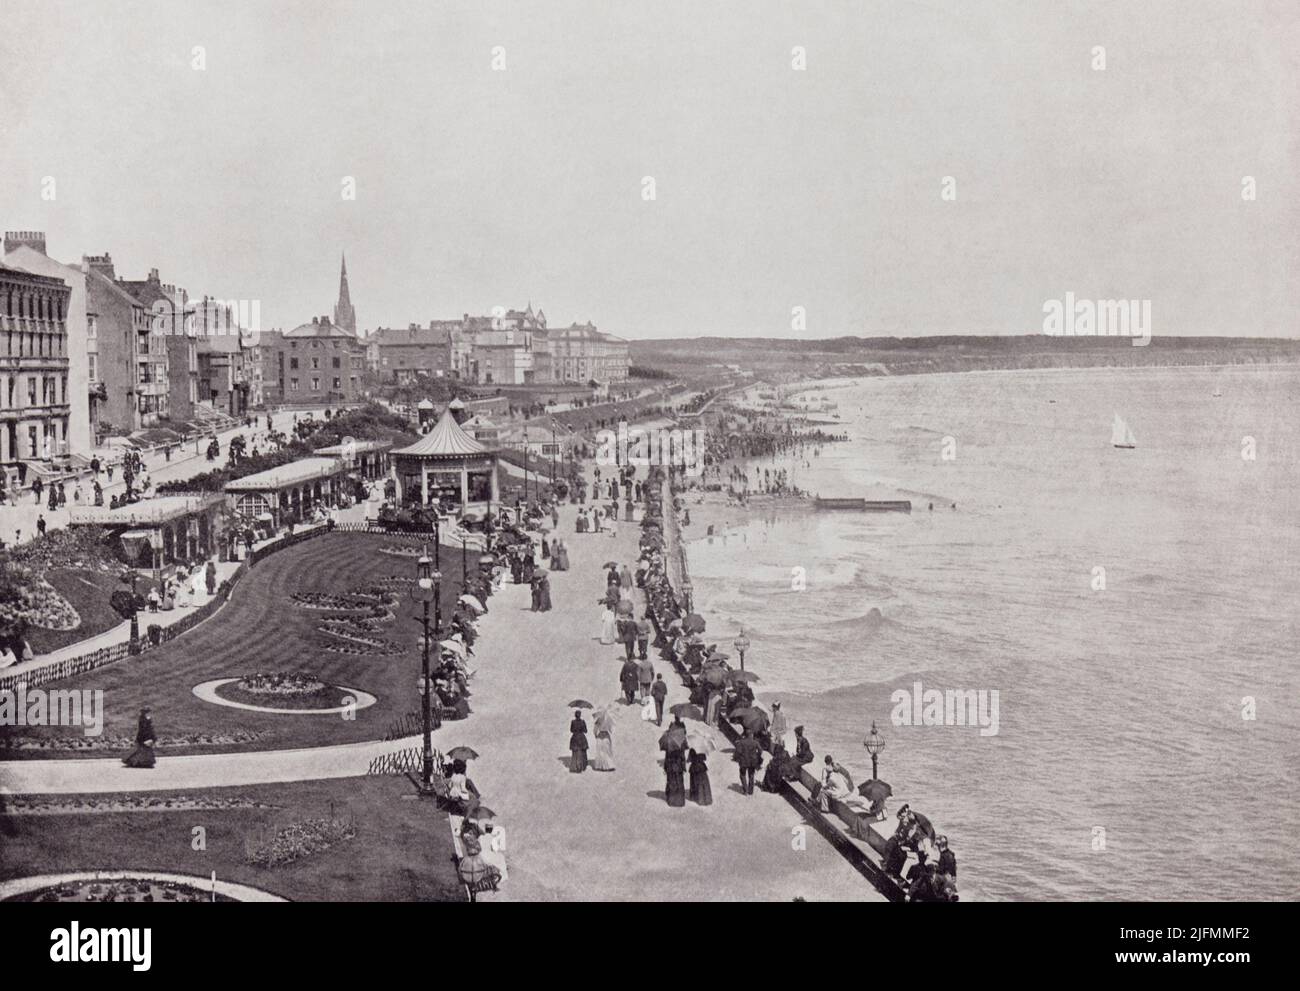 Bridlington, East Yorkshire, England, looking down the Prince's Parade in the 19th century.  From Around The Coast,  An Album of Pictures from Photographs of the Chief Seaside Places of Interest in Great Britain and Ireland published London, 1895, by George Newnes Limited. Stock Photo